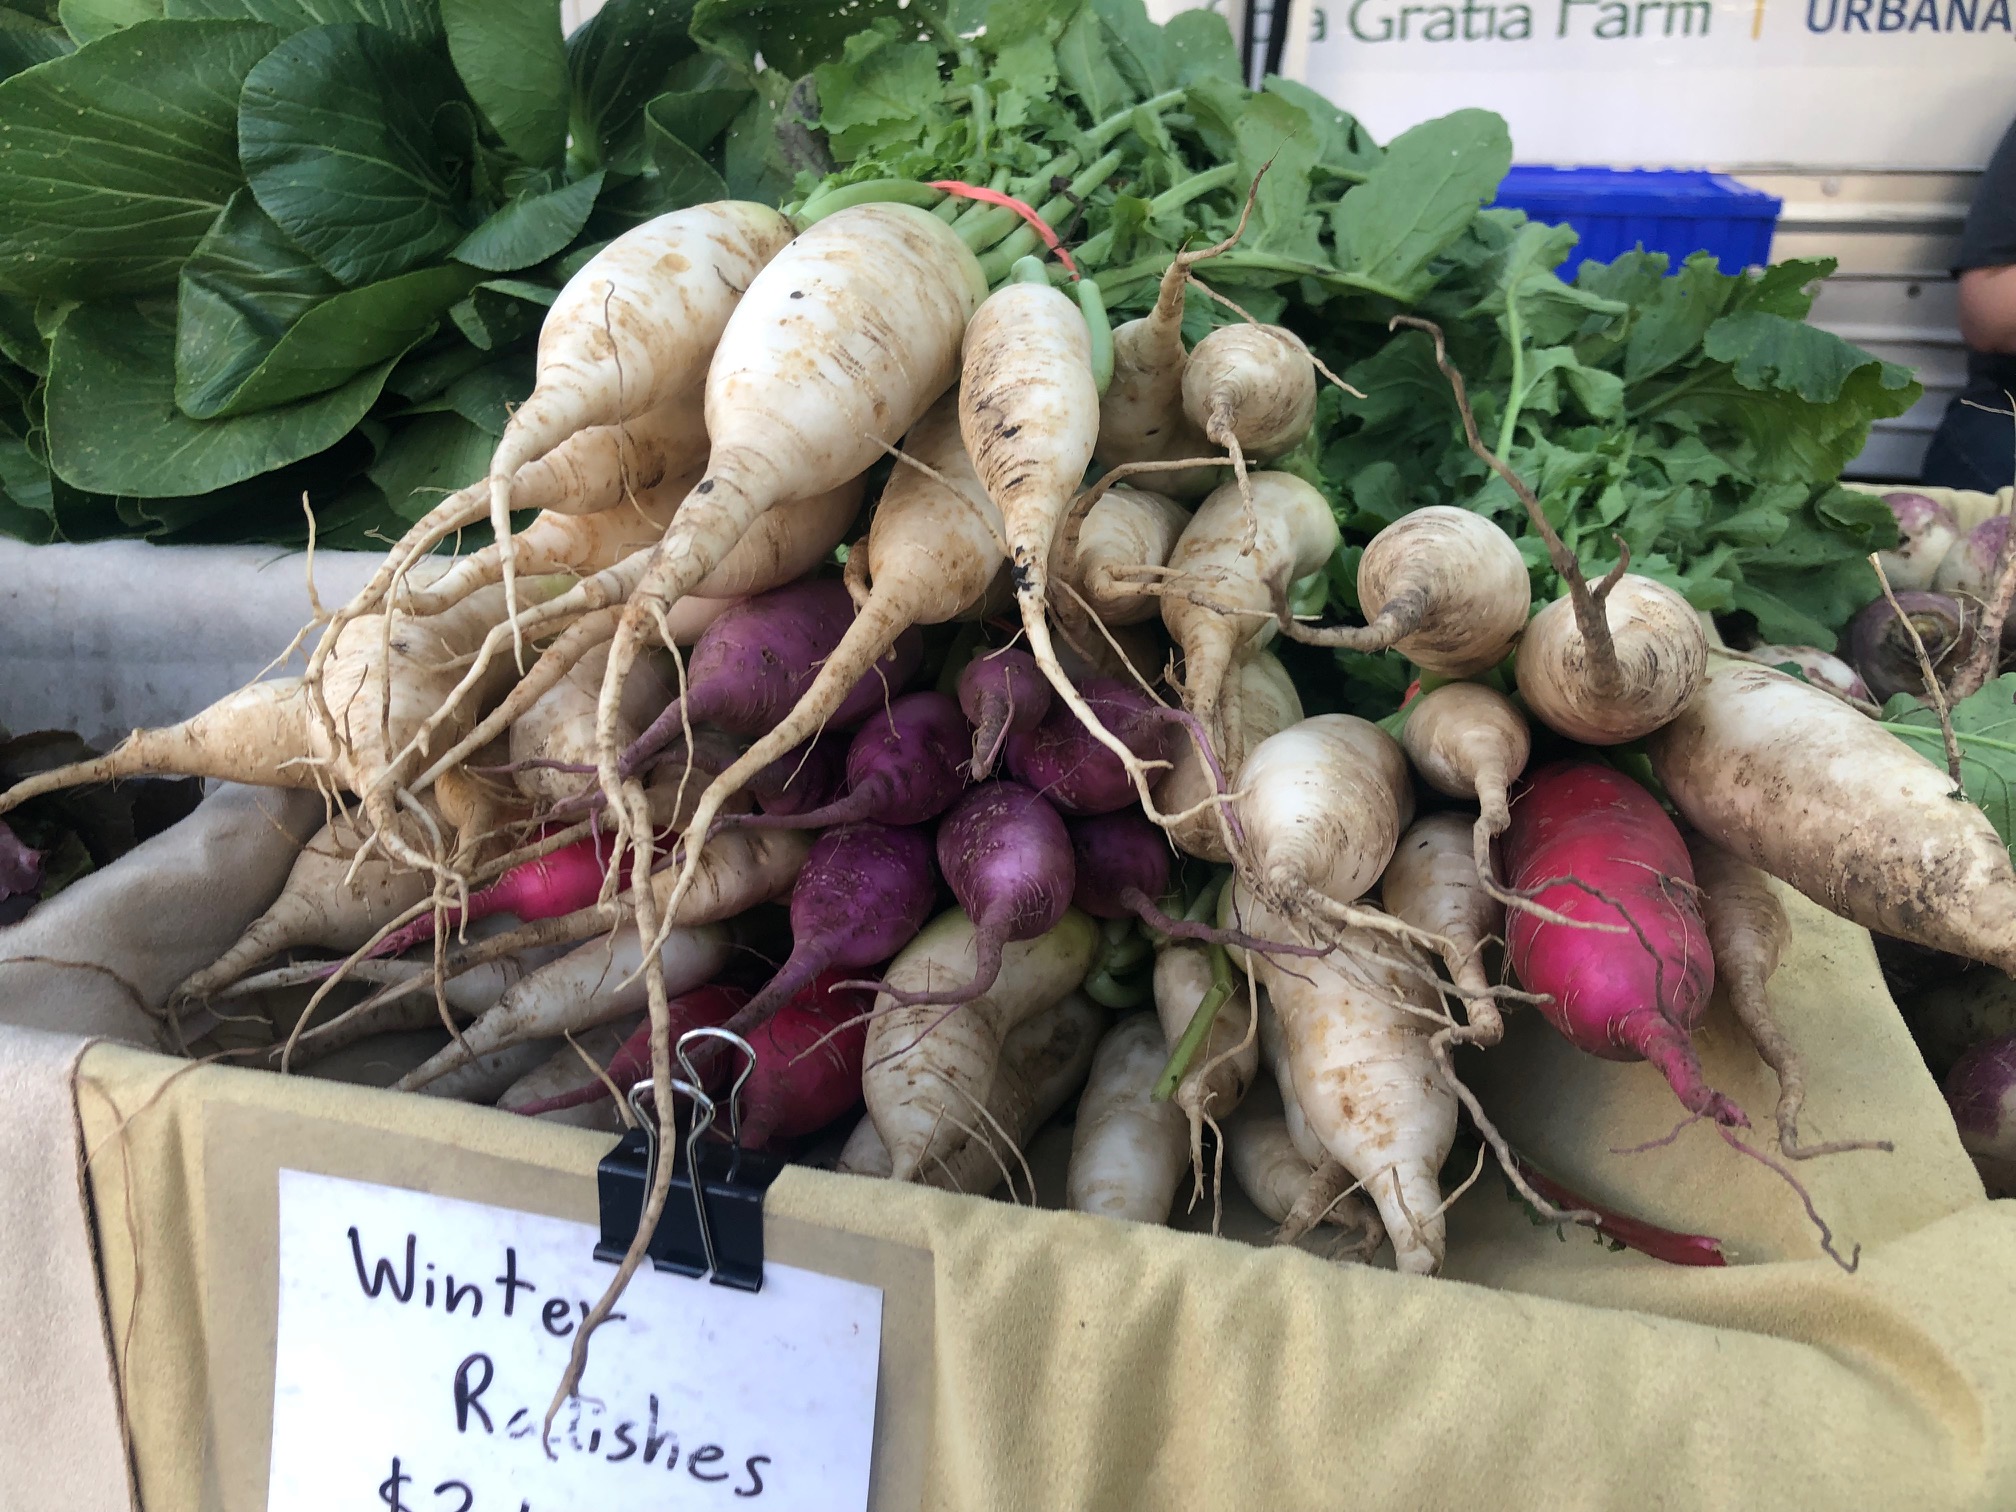 On a farm stand lined with burlap, there are winter radishes in both white and purple color with long, skinny roots with a bit of dirt. Photo by Alyssa Buckley.